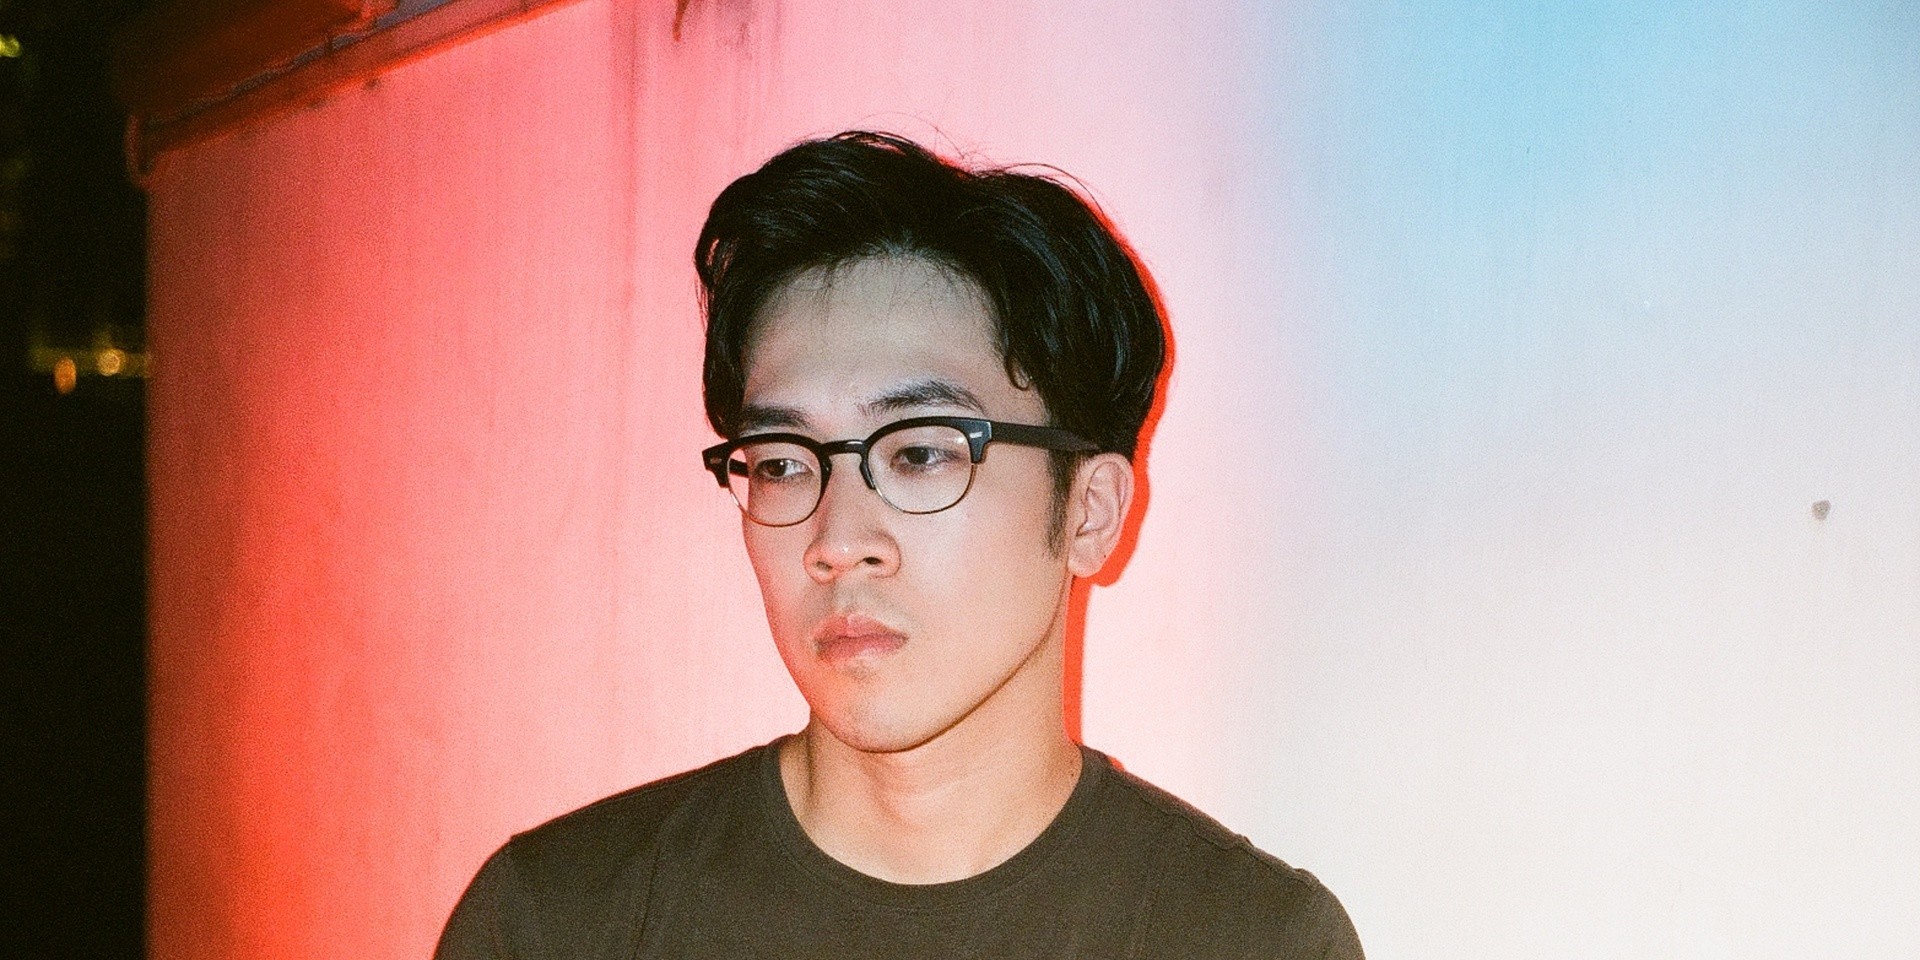 Charlie Lim expertly flirts with UK garage on new single 'Welcome Home' - listen